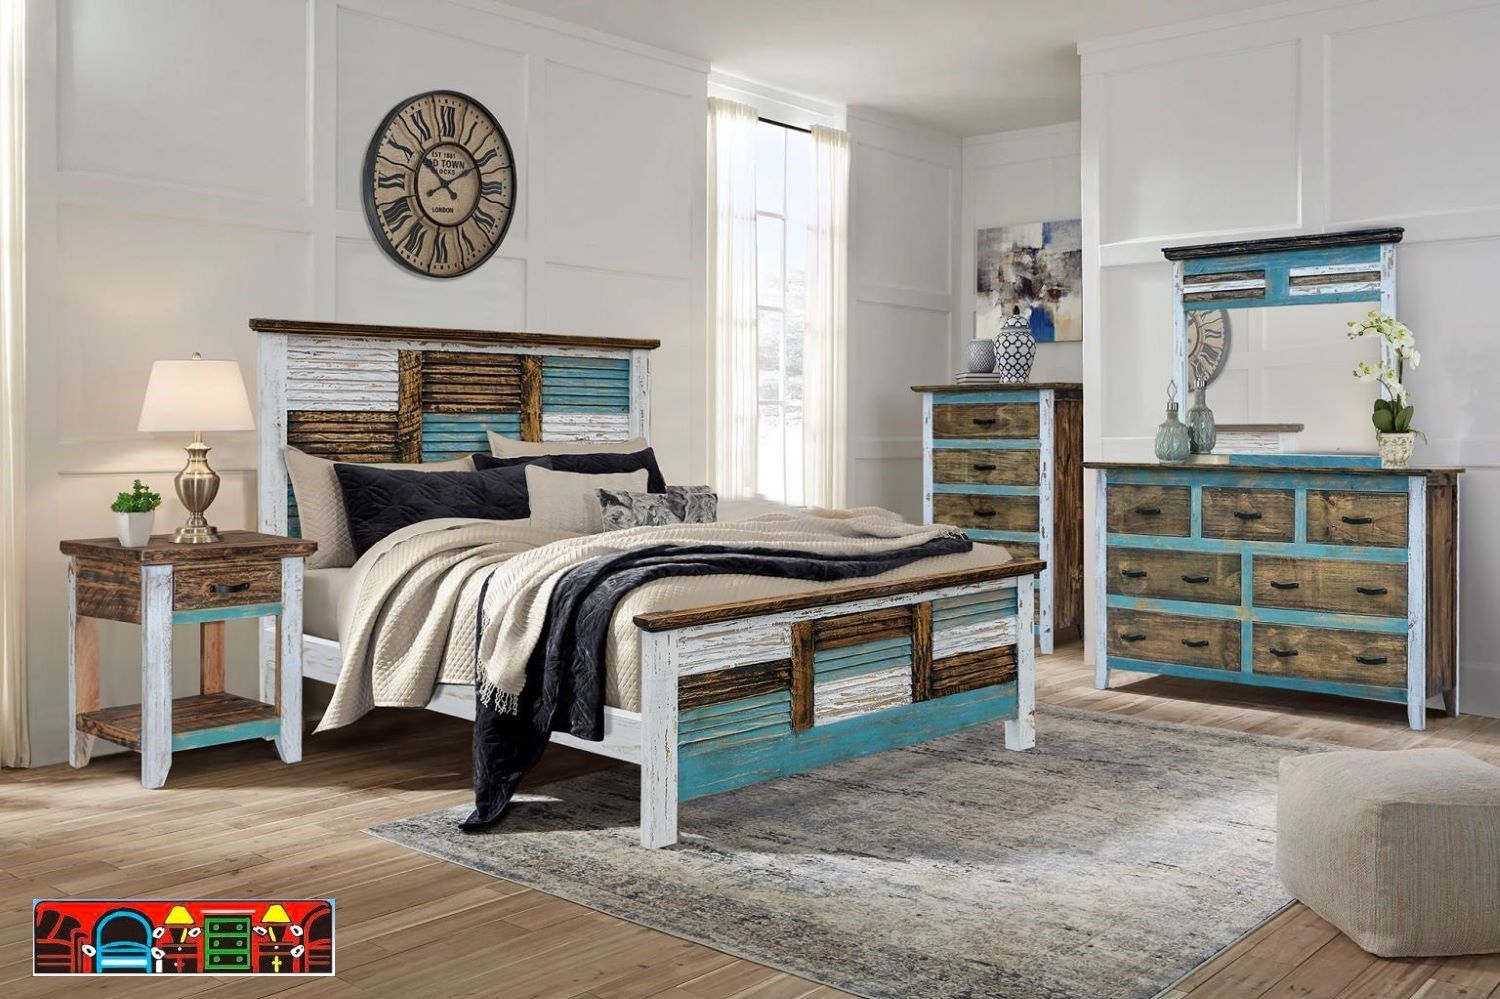 The Cabana Bedroom Group is crafted from solid wood, featuring a blend of brown, white, and turquoise hues with a patchwork design of individual slats.